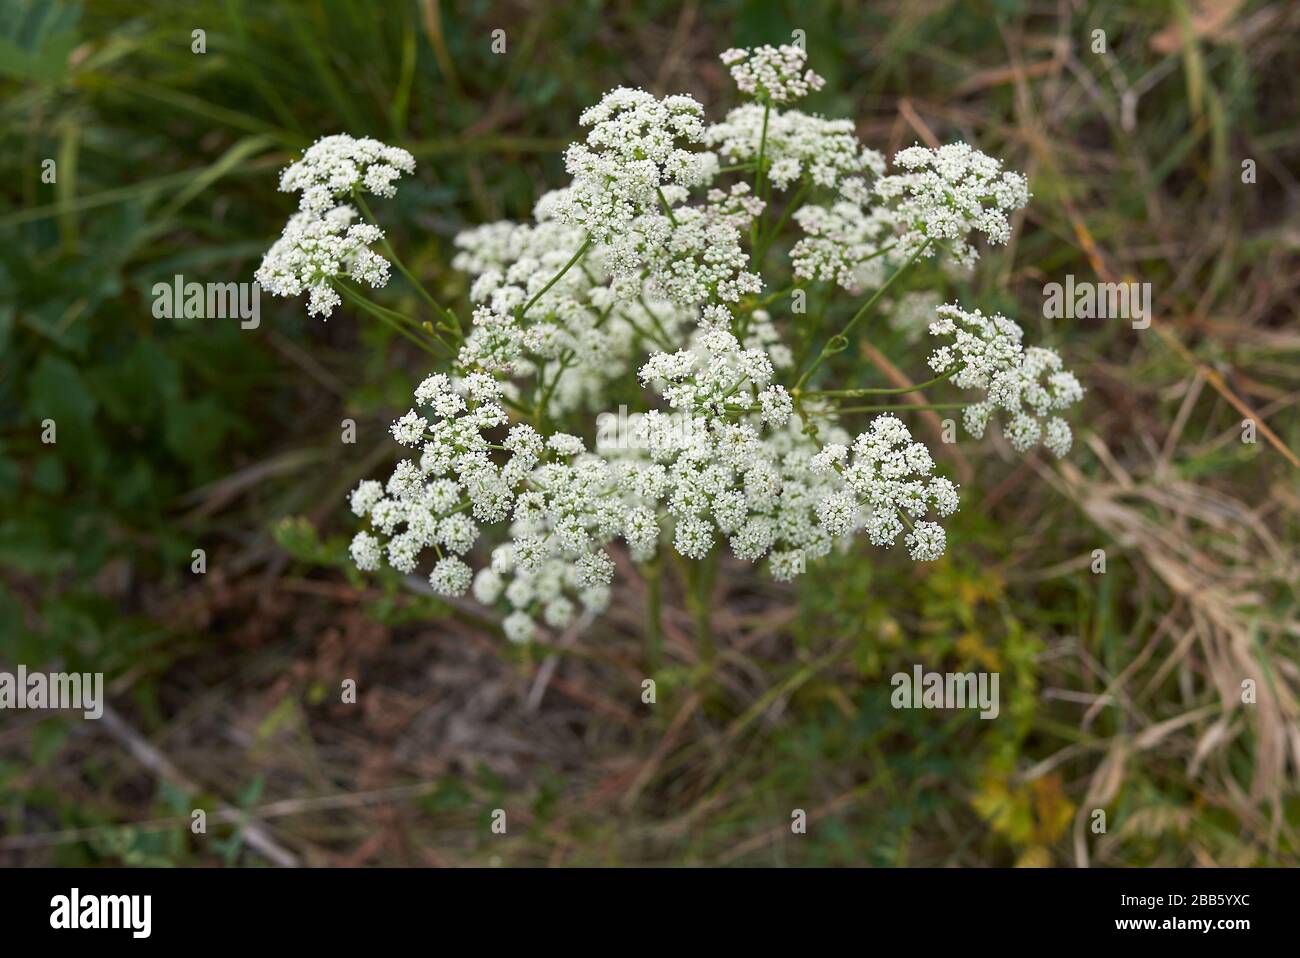 Aethusa cynapium plant with white flowers Stock Photo - Alamy